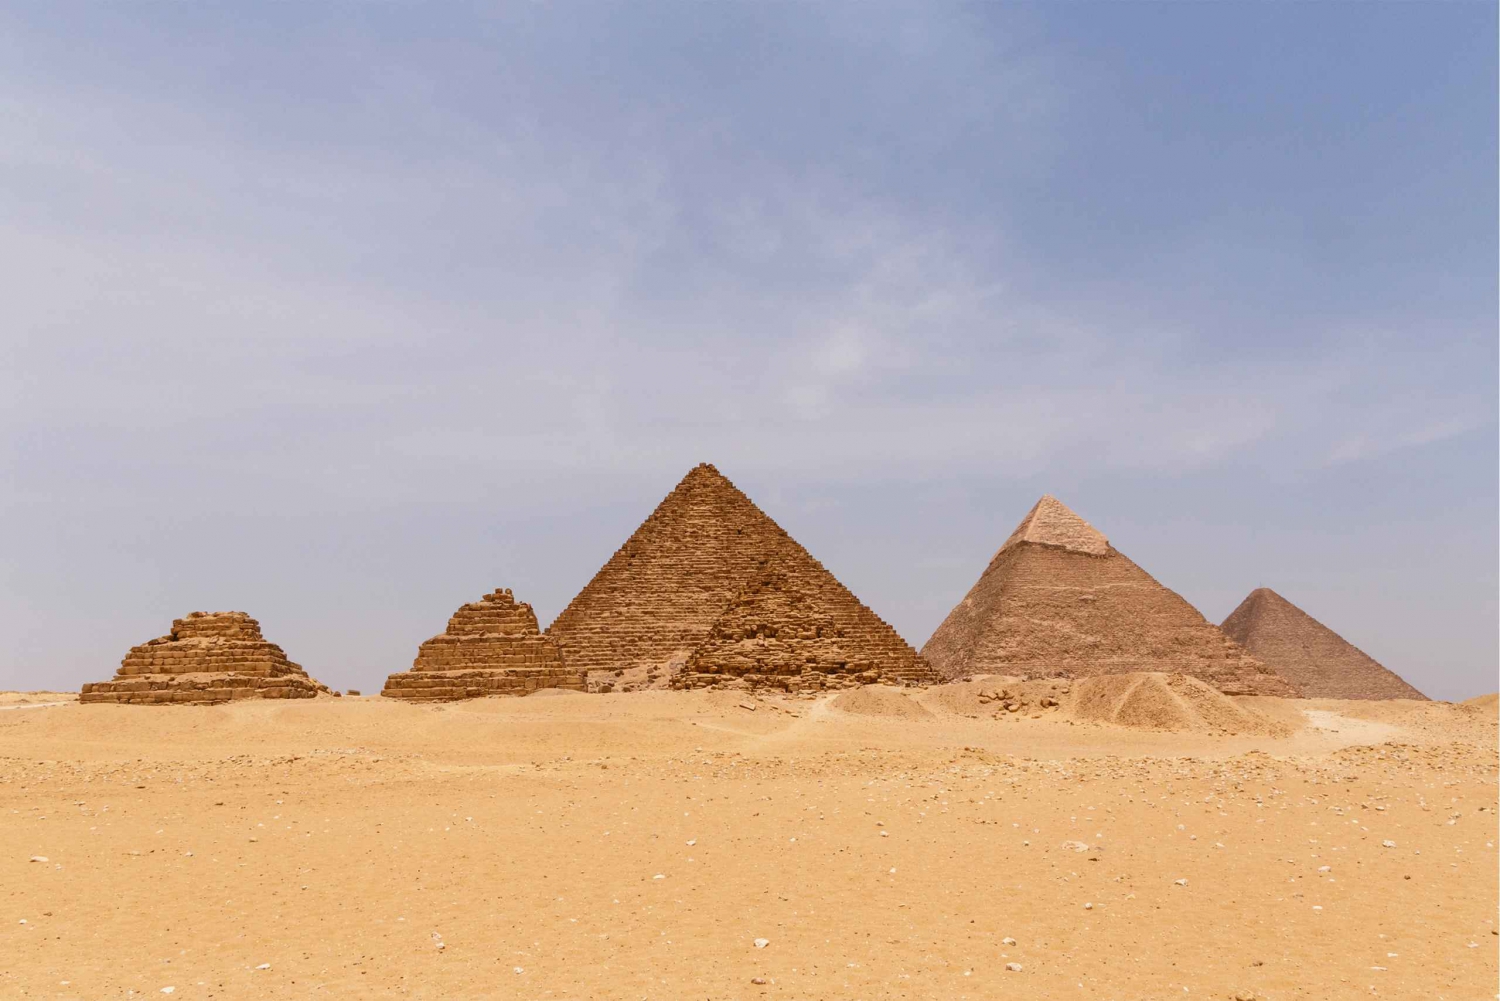 Cairo: Pyramids and Sphinx Tour with River Nile Felucca Ride